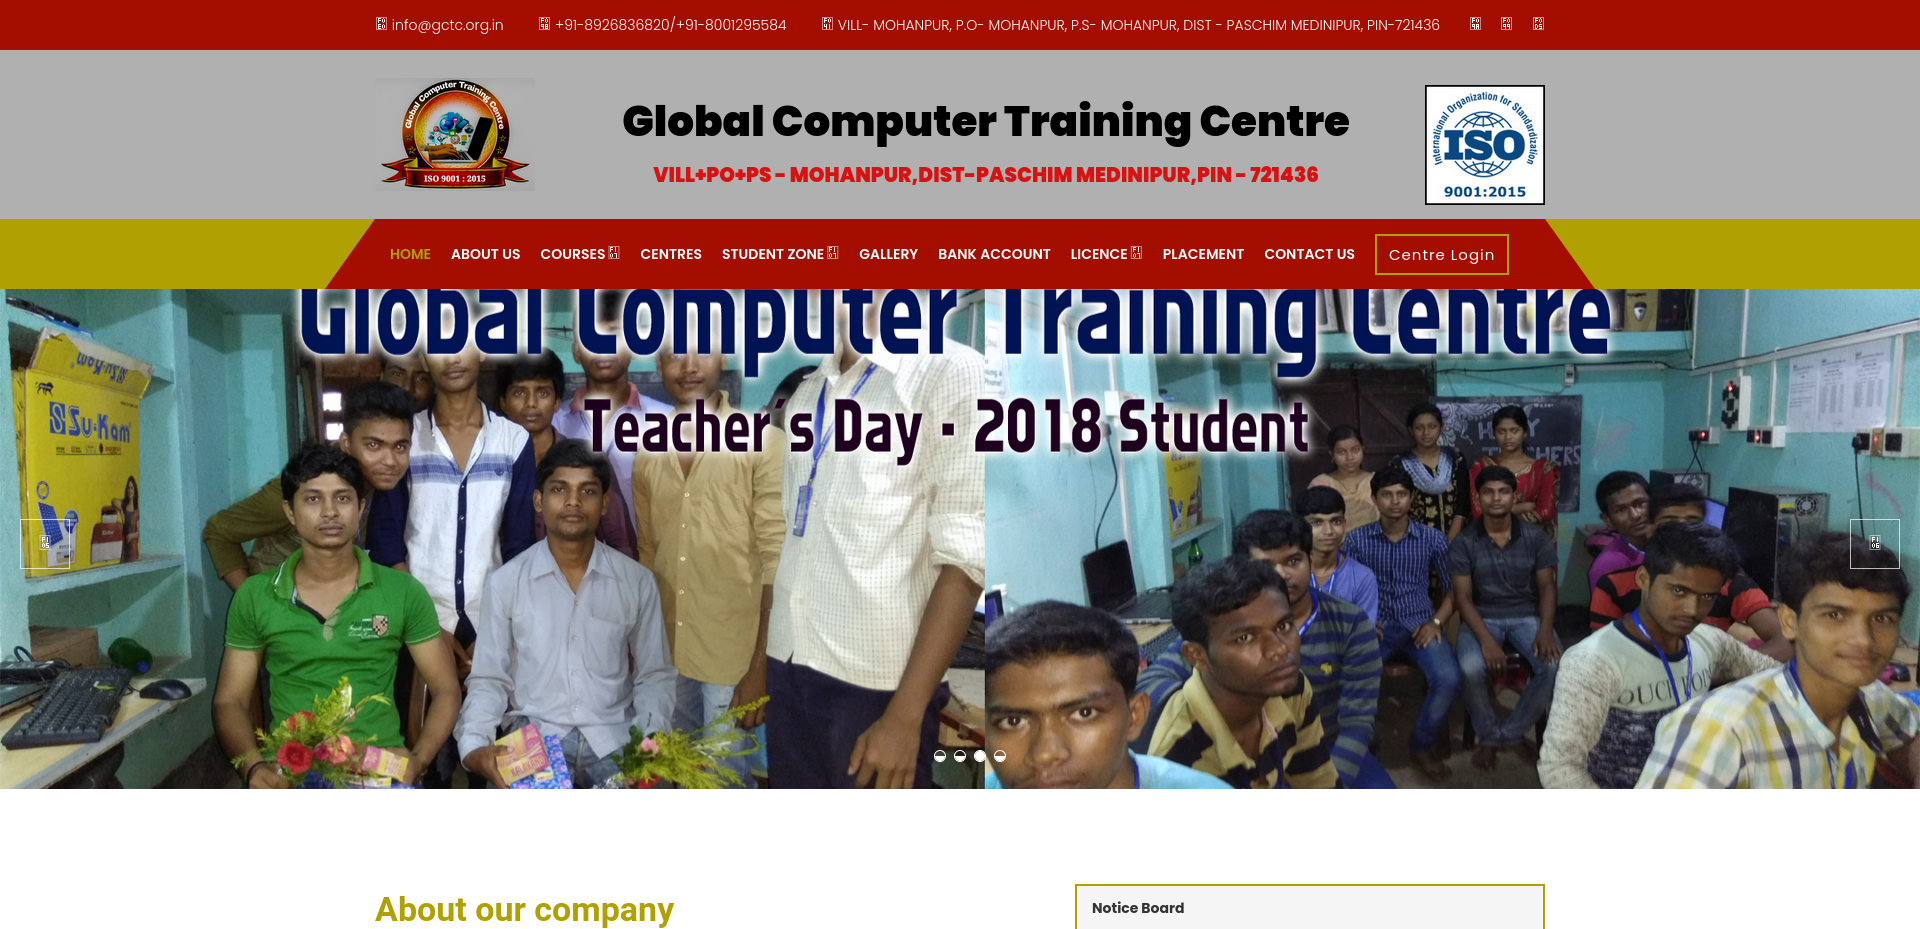 Global Computer Training Centre